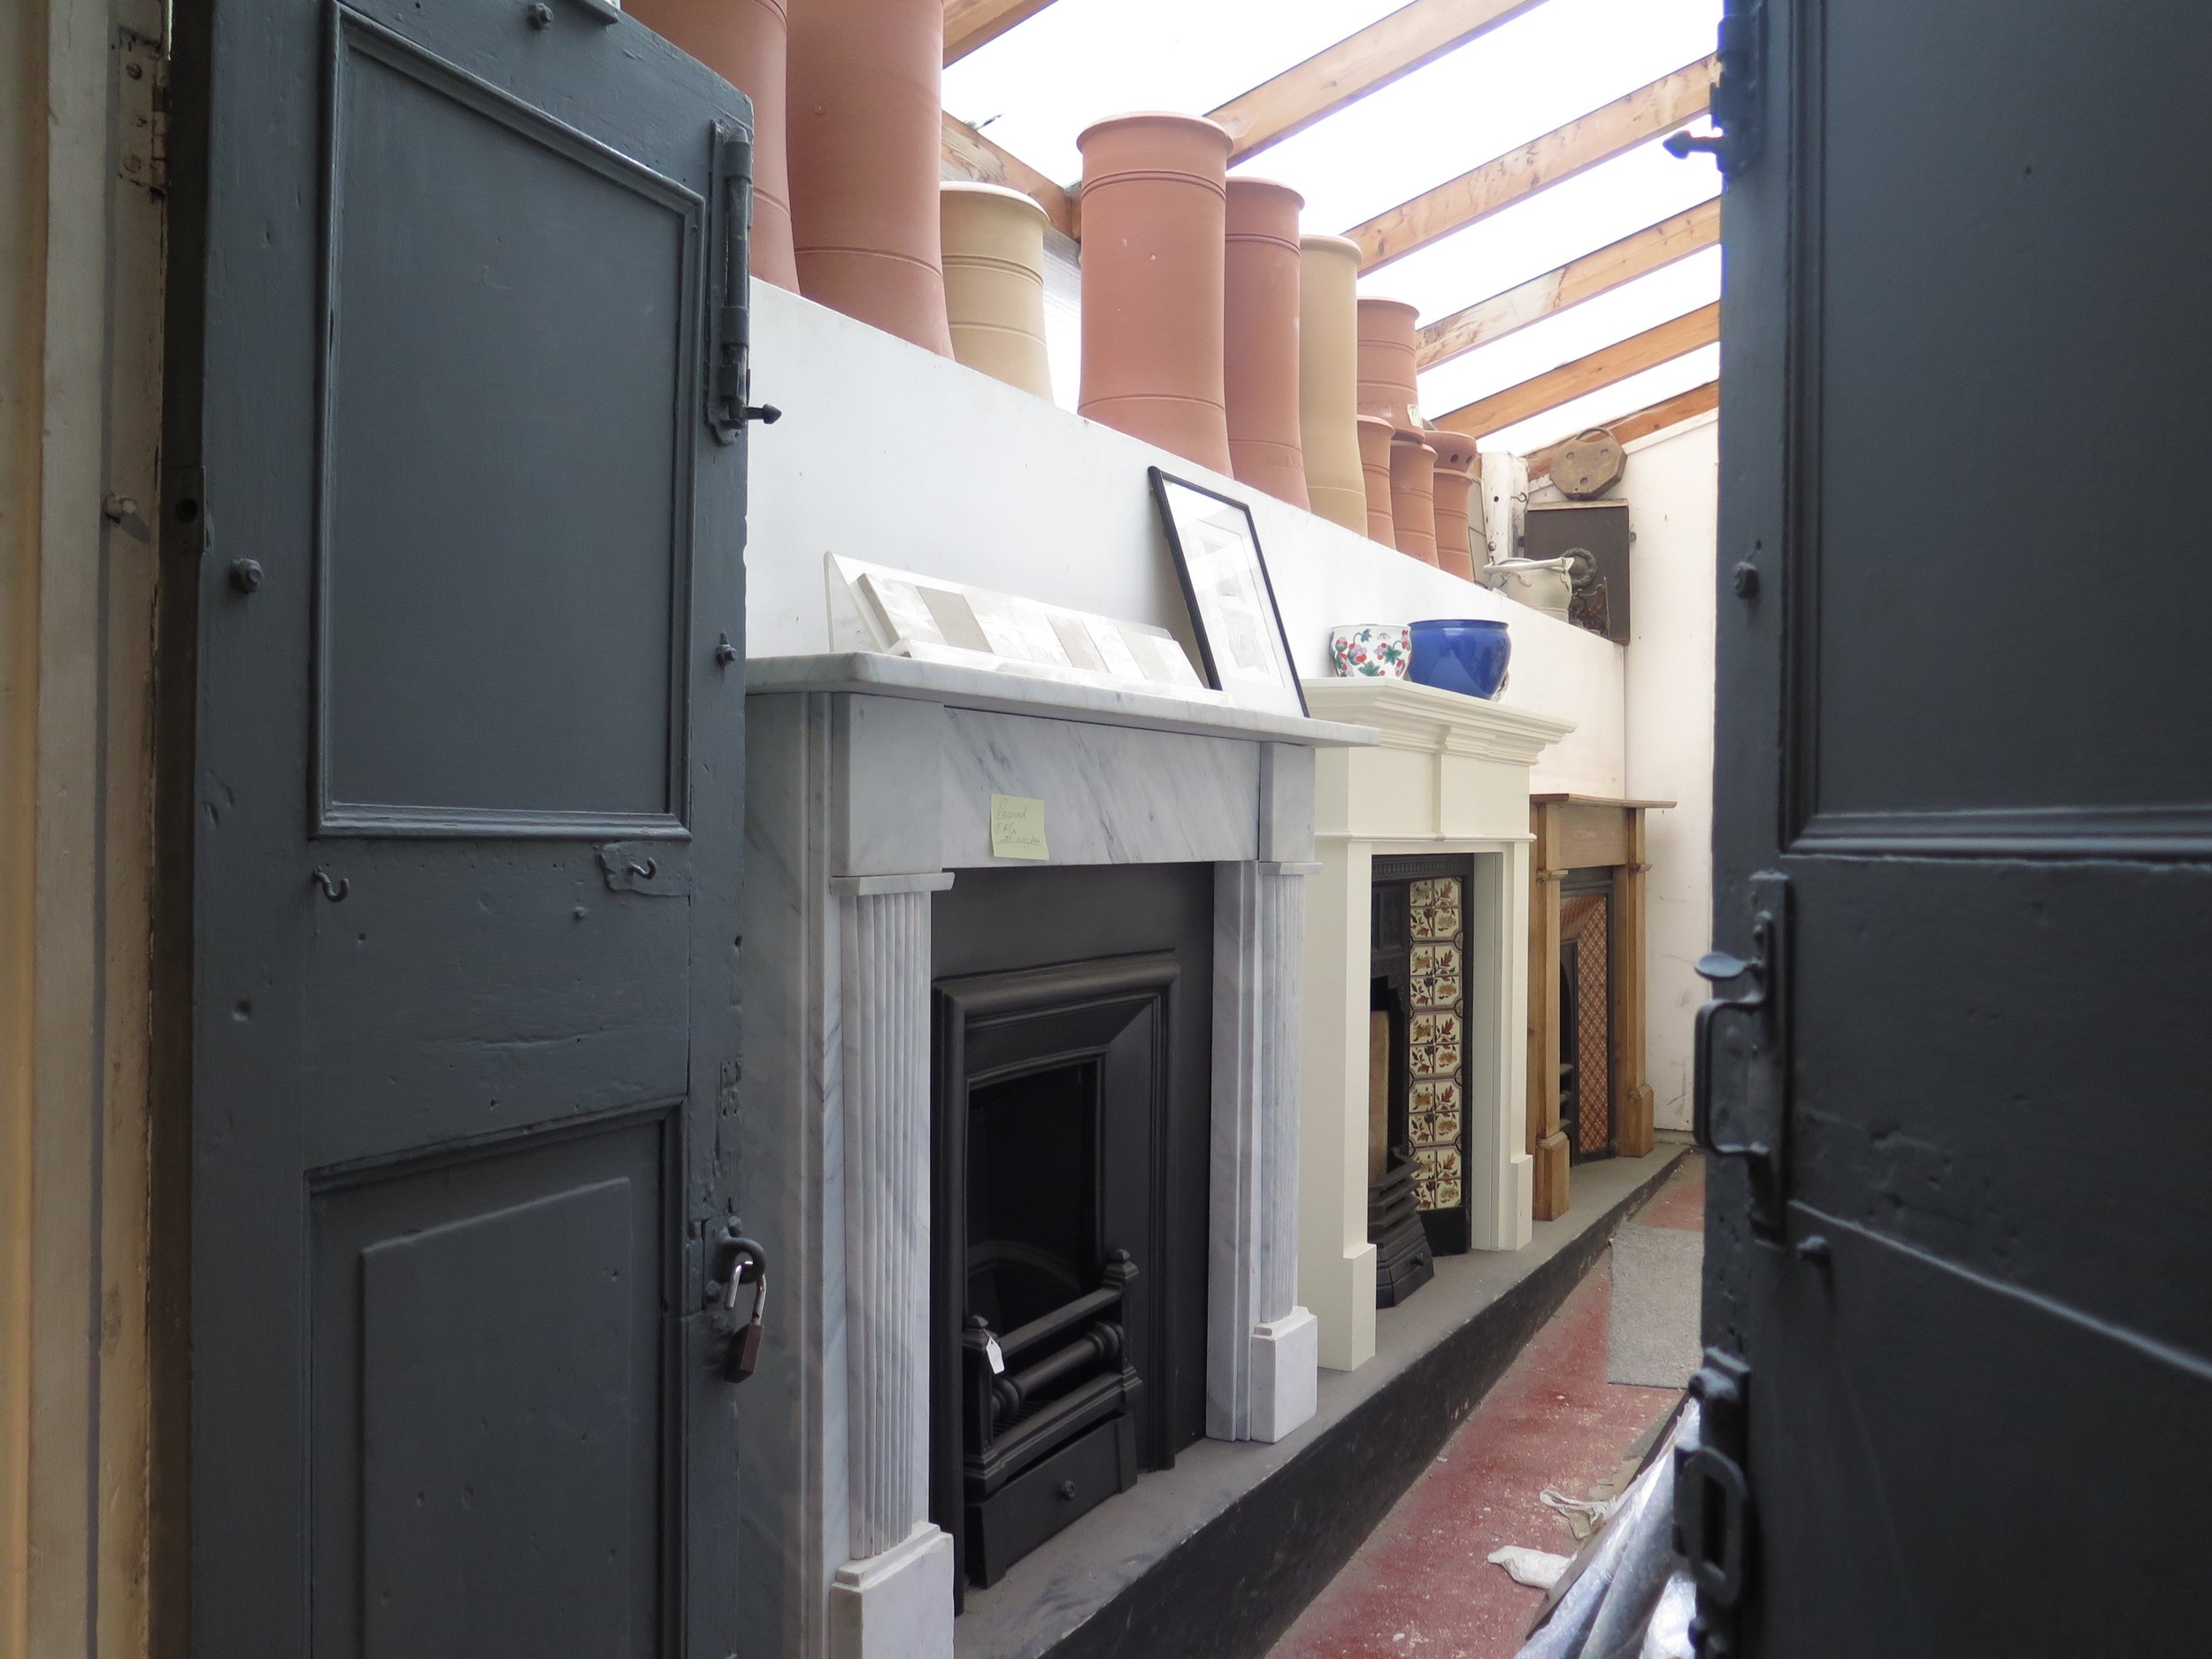 Westcombes Fireplace and Stove Shop in Lee South London Club